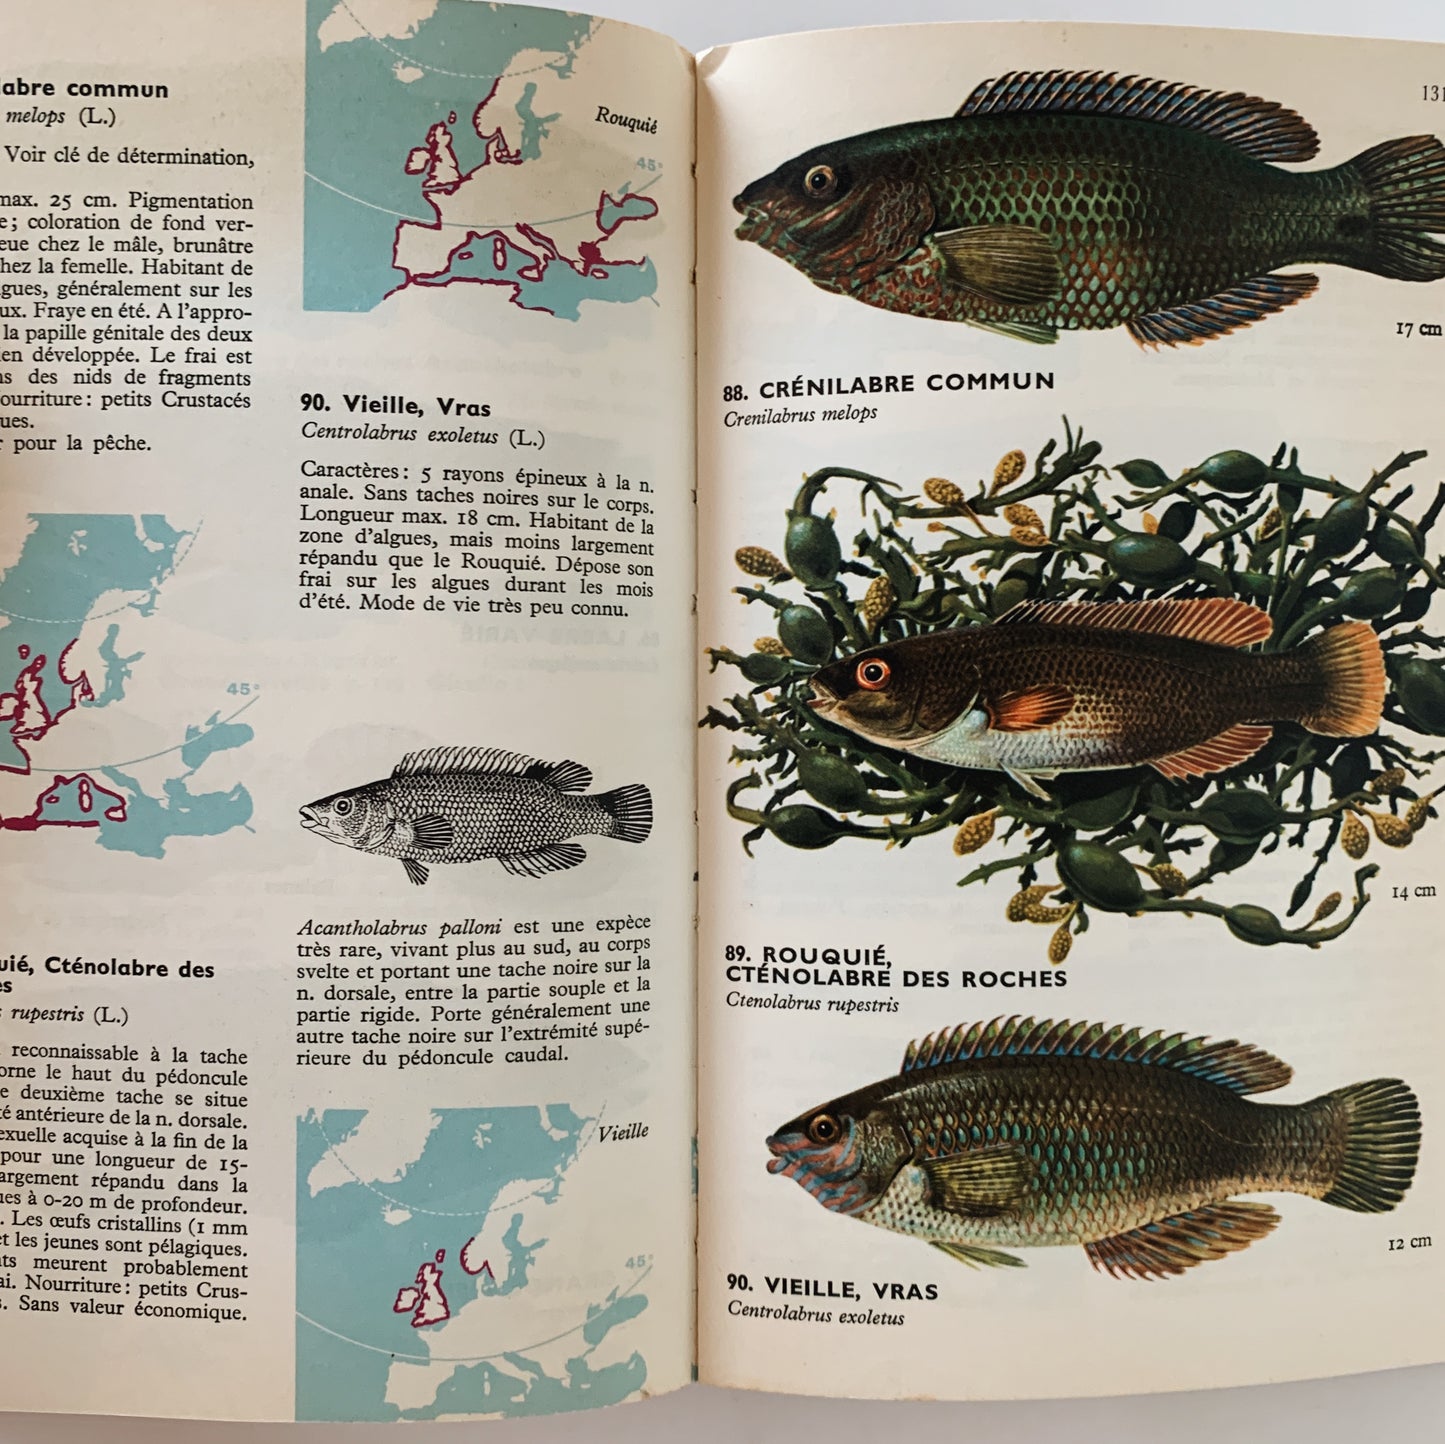 Les Guides Du Naturaliste - Guide Des Poissions De Mer Et Peche, 1966, French Illustrated Field Guide to Fish and Fishing